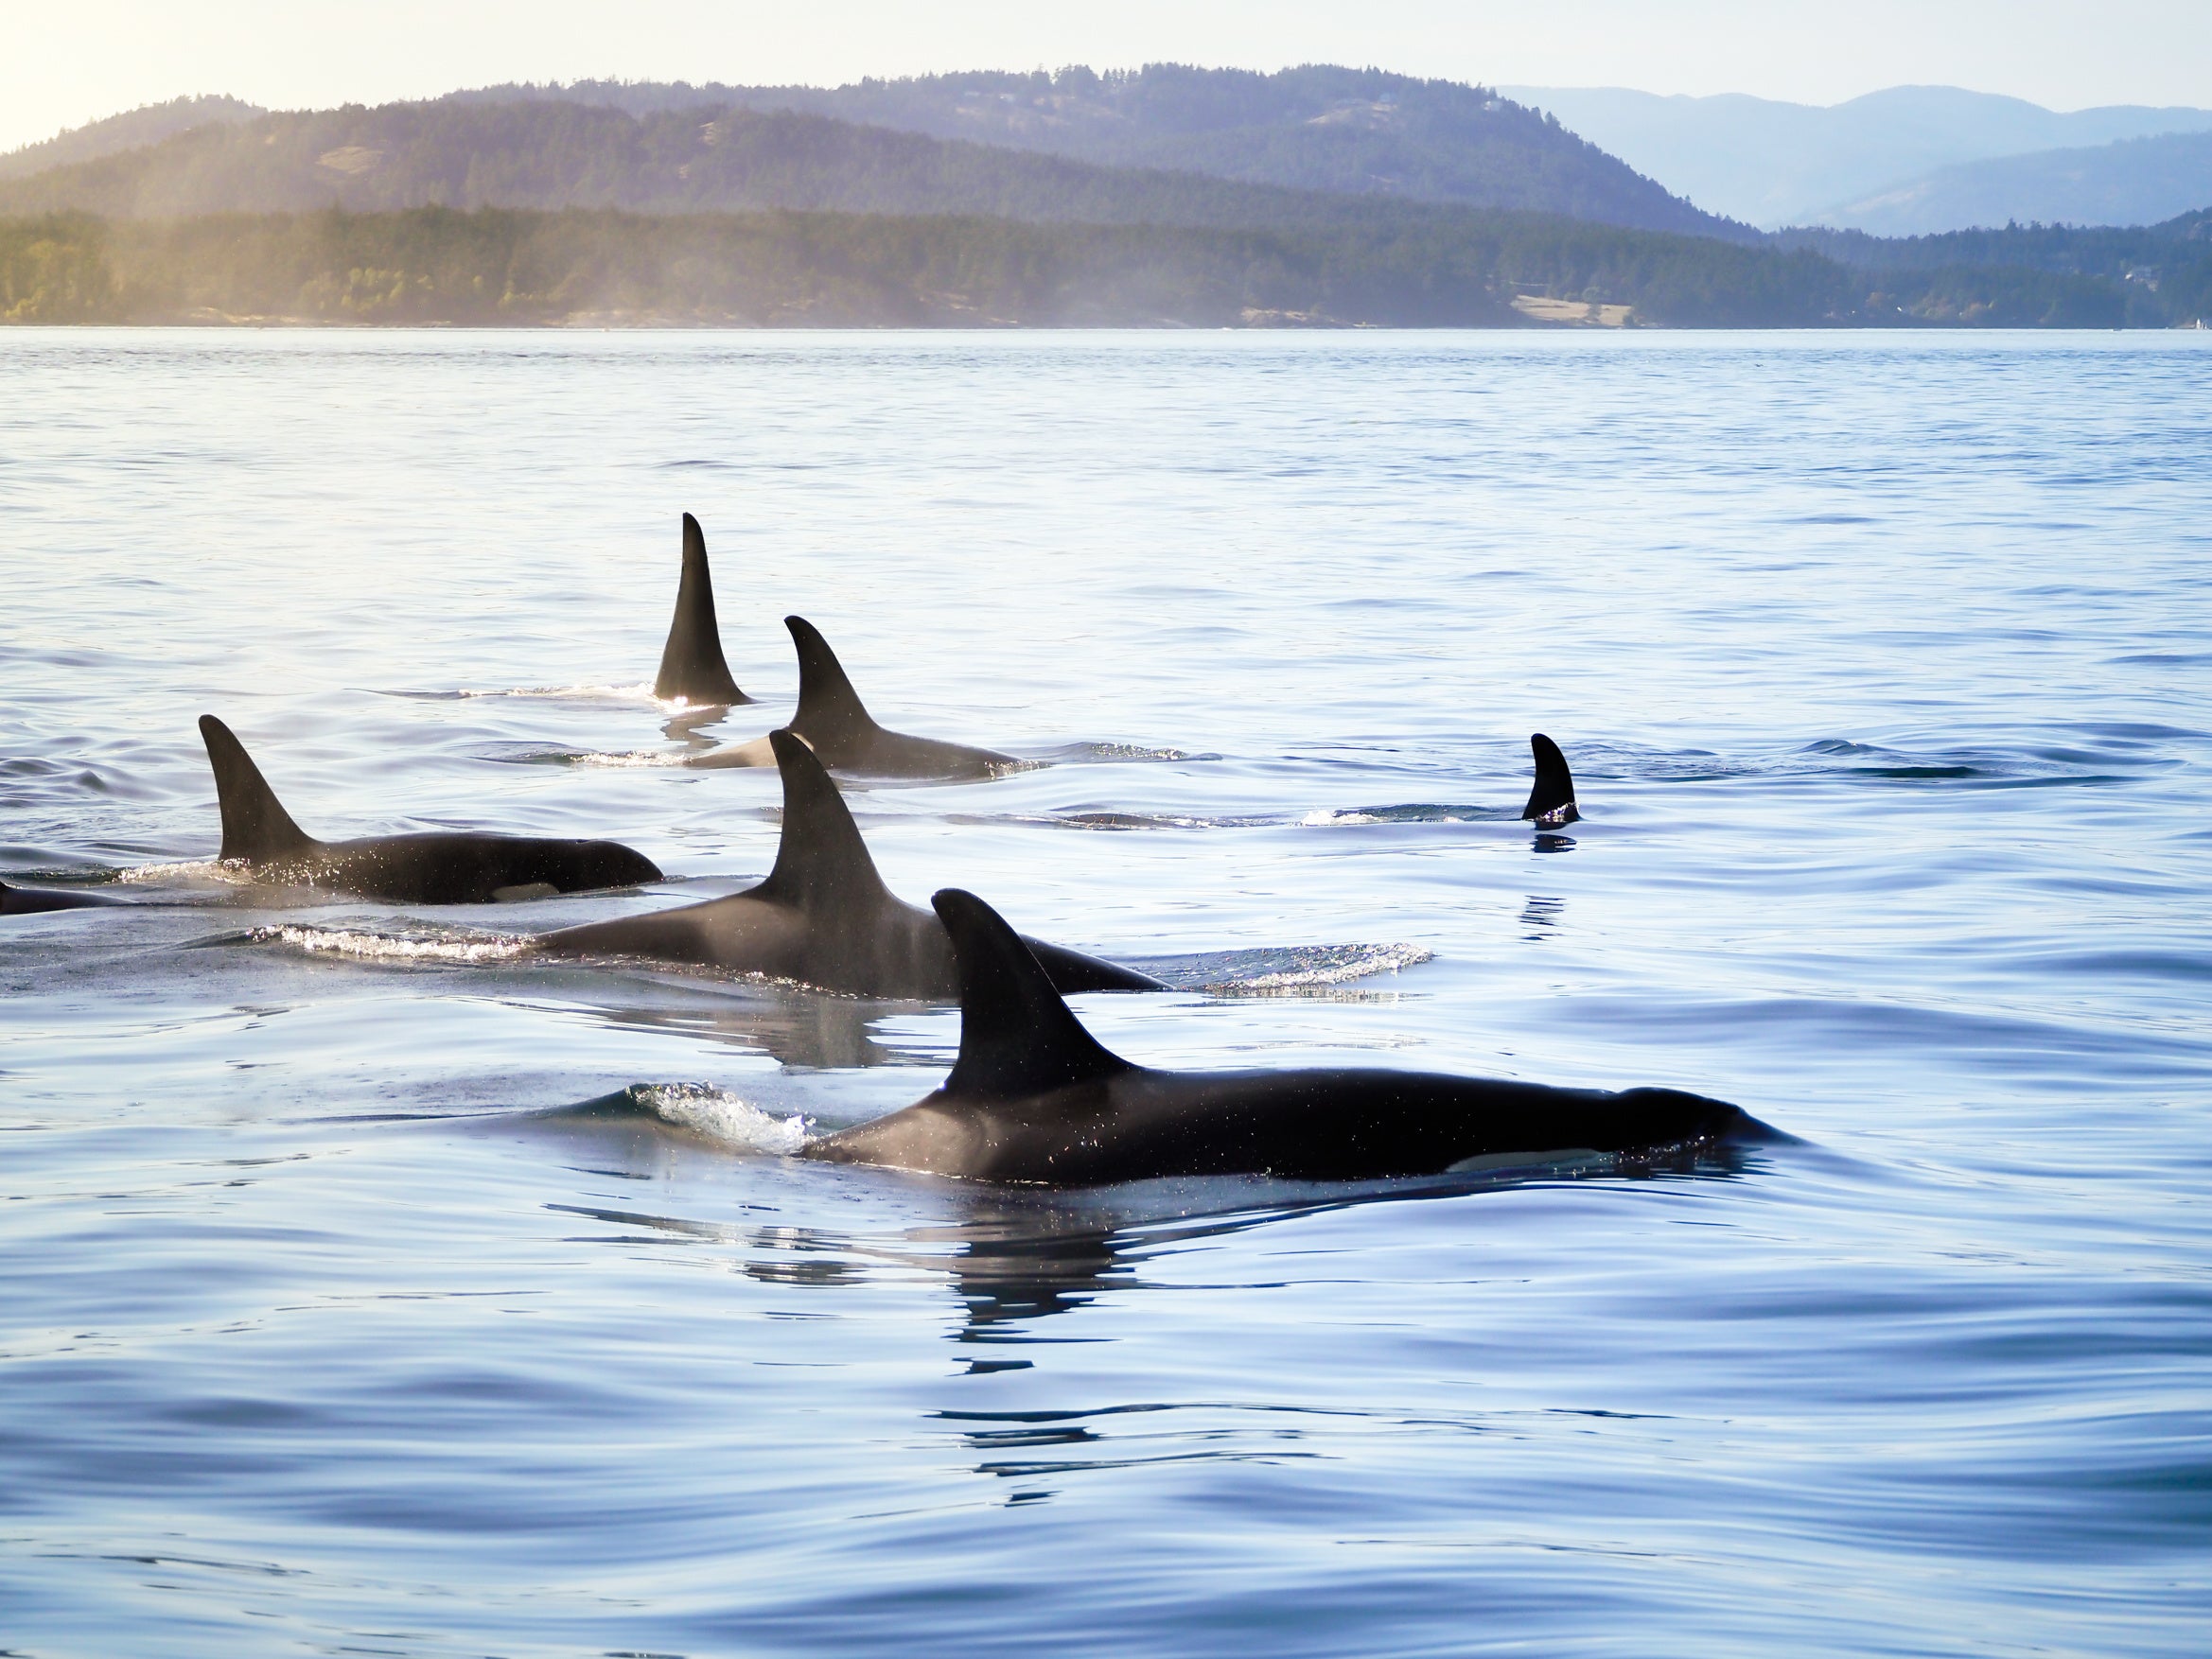 a pod of killer whales hunting together